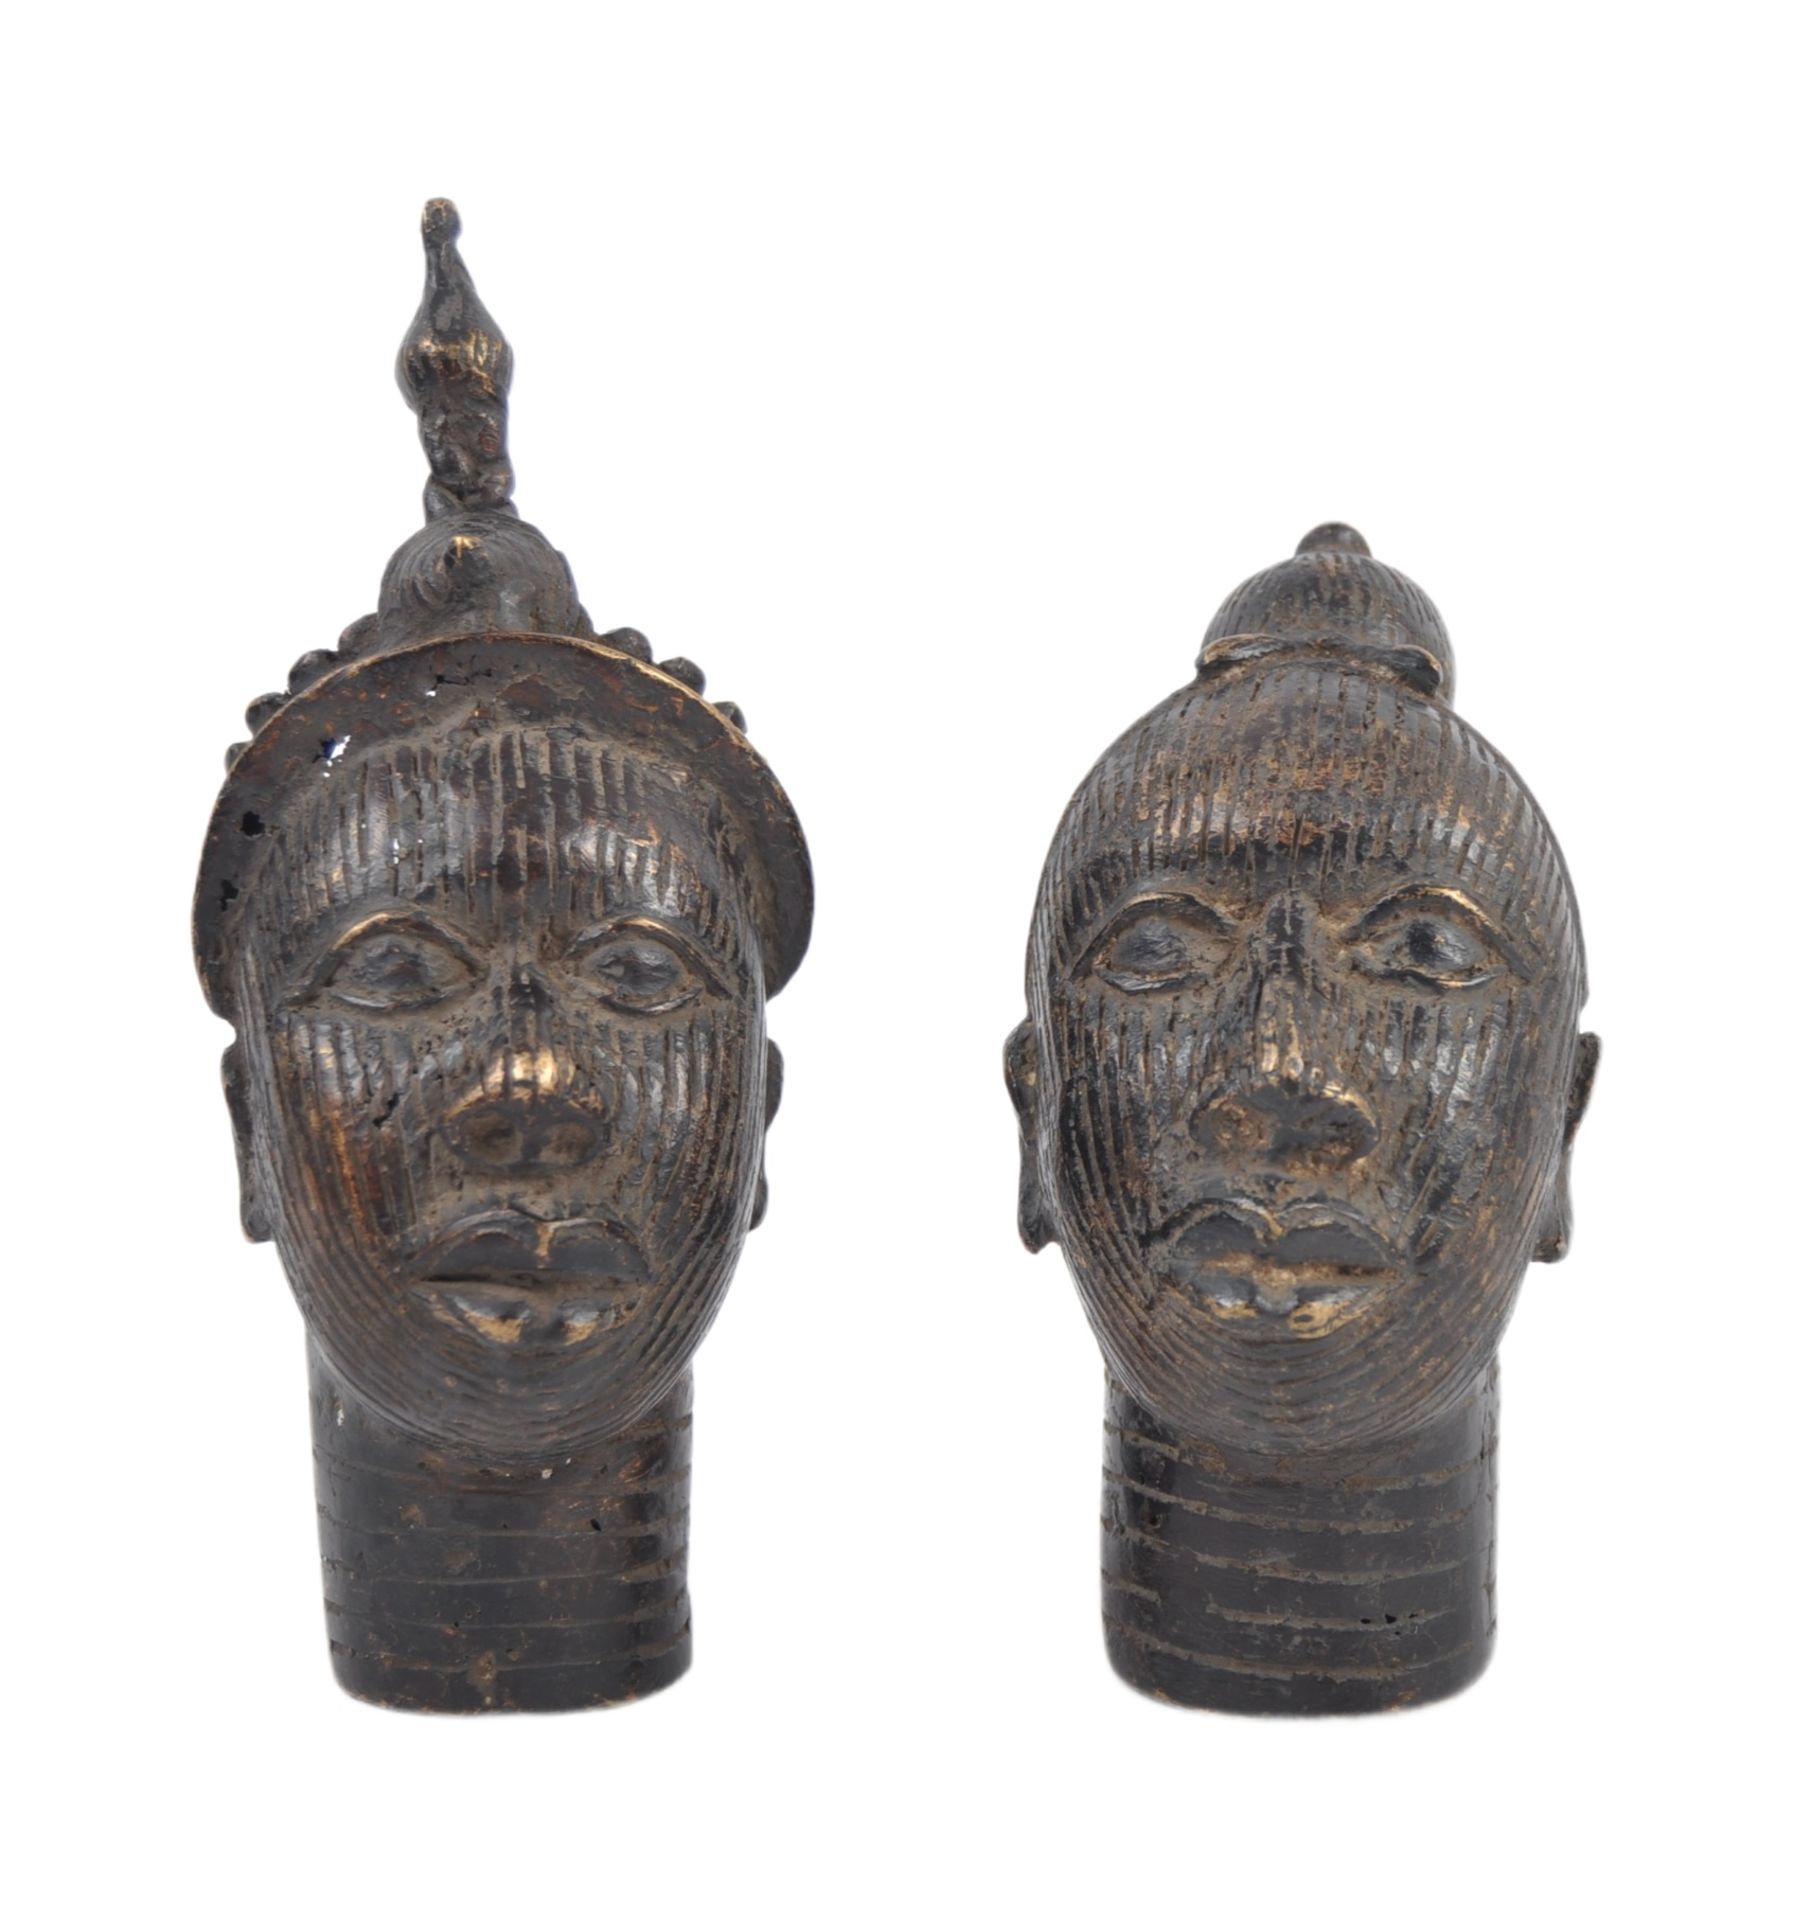 PAIR OF 19TH CENTURY AFRICAN BRONZE BUSTS